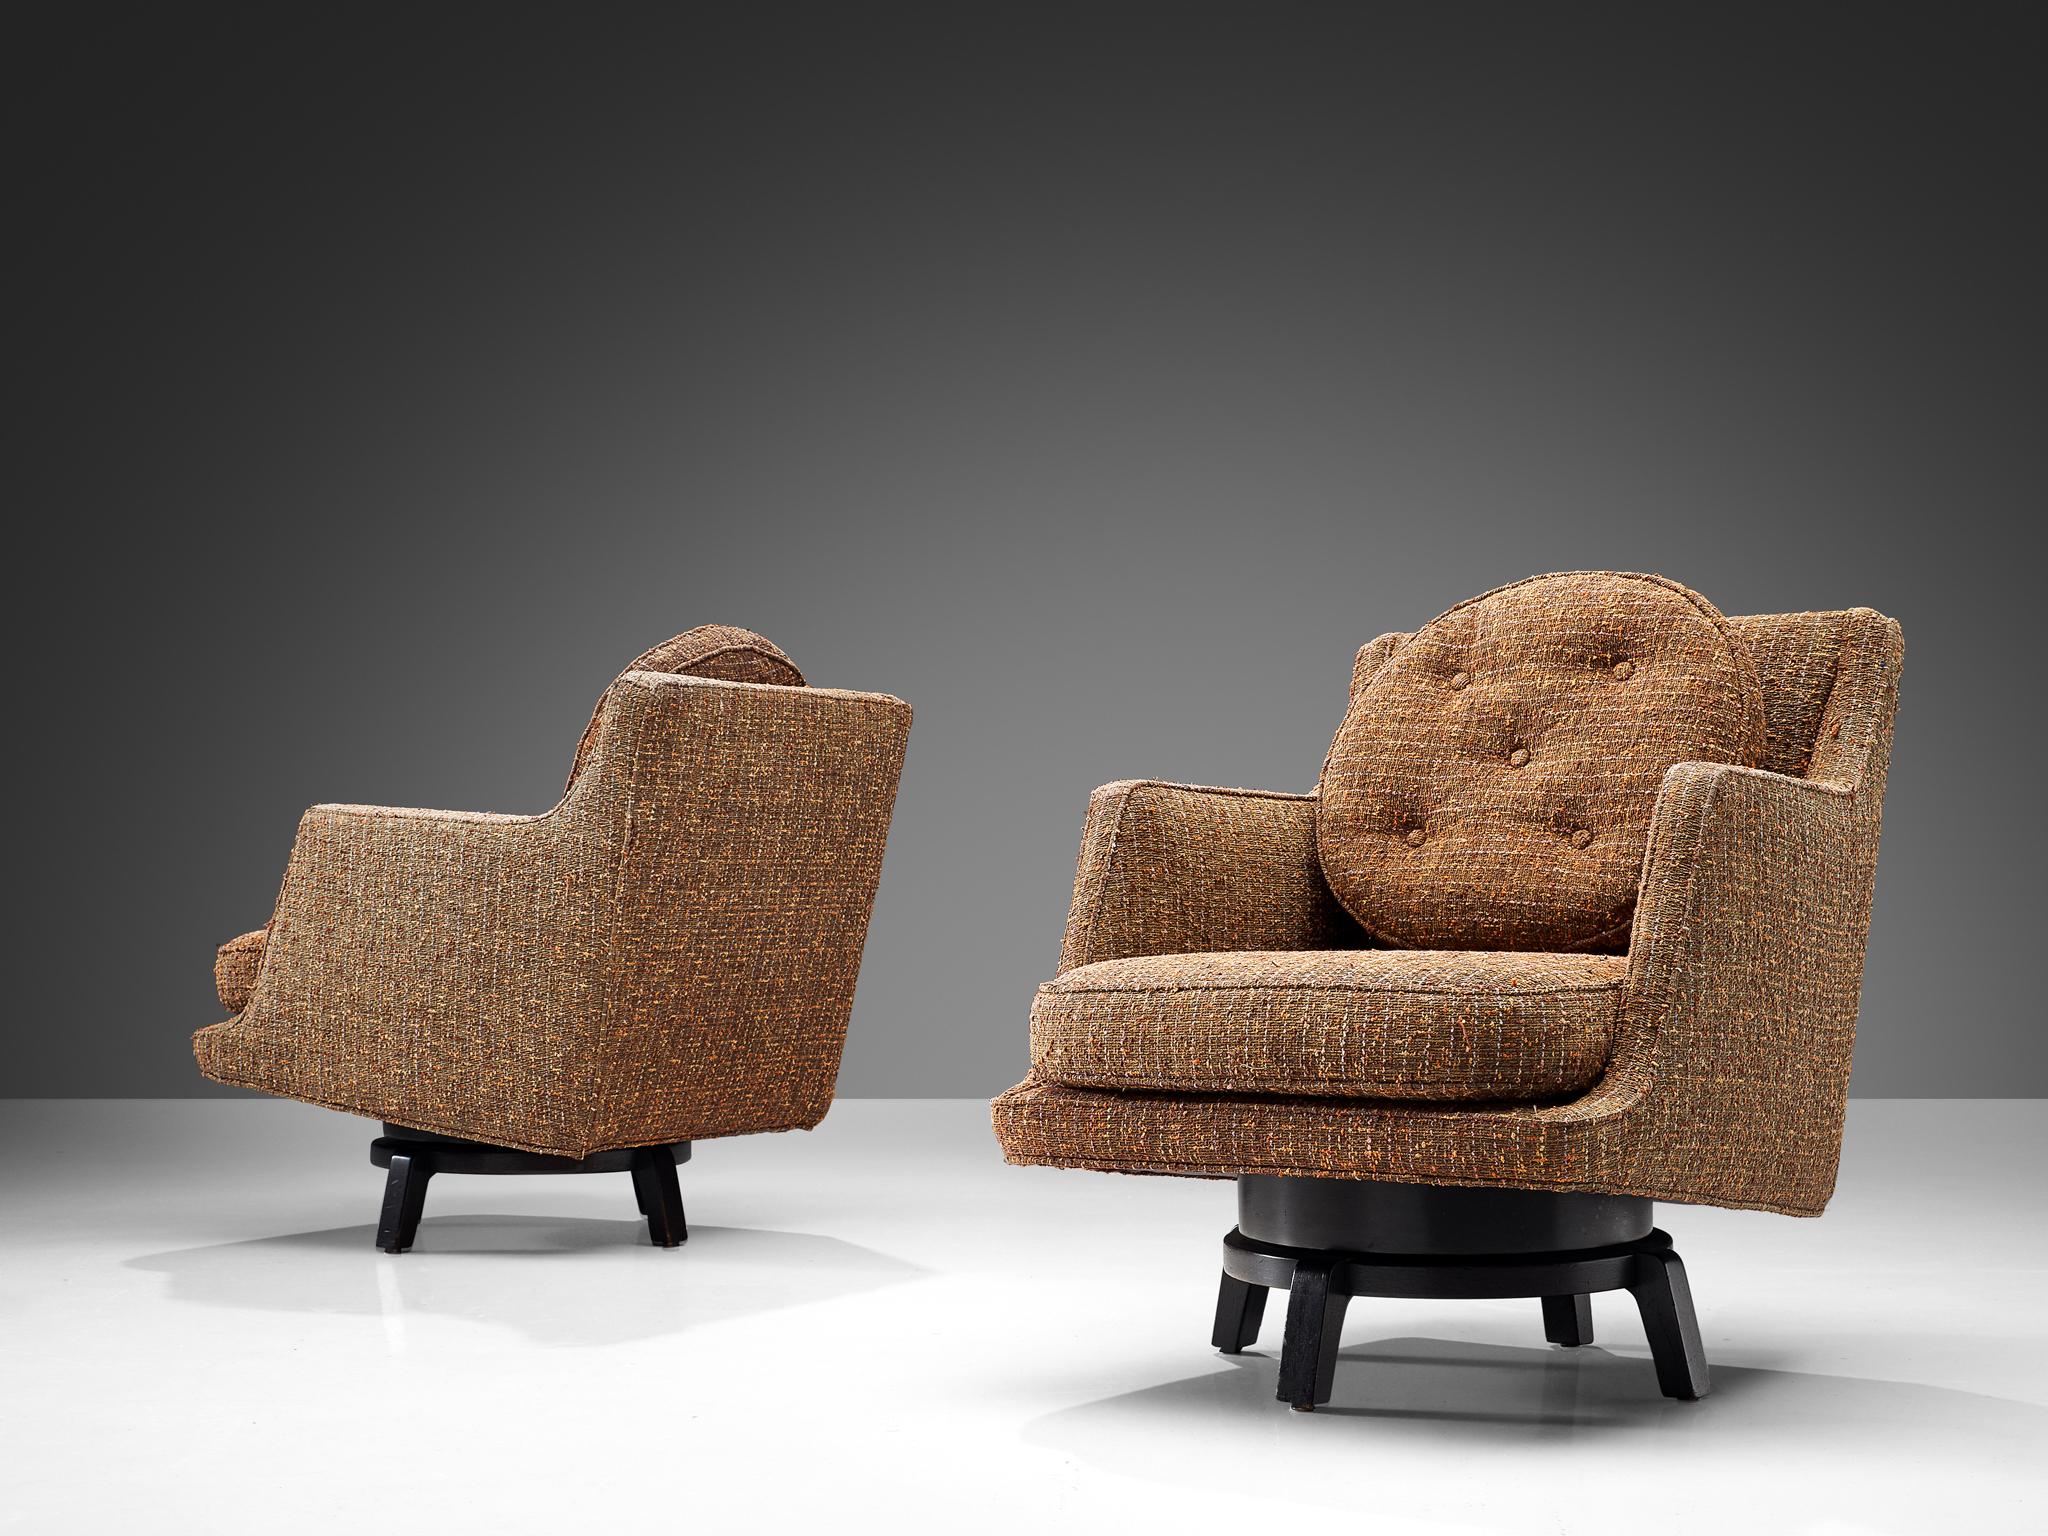 Edward Wormley, swivel lounge chairs, model 5609, fabric, mahogany, United States, 1950s

These swivelling lounge chairs by Edward Wormley feature are a combination of a traditional design with great geometric forms but also playful detailing. A